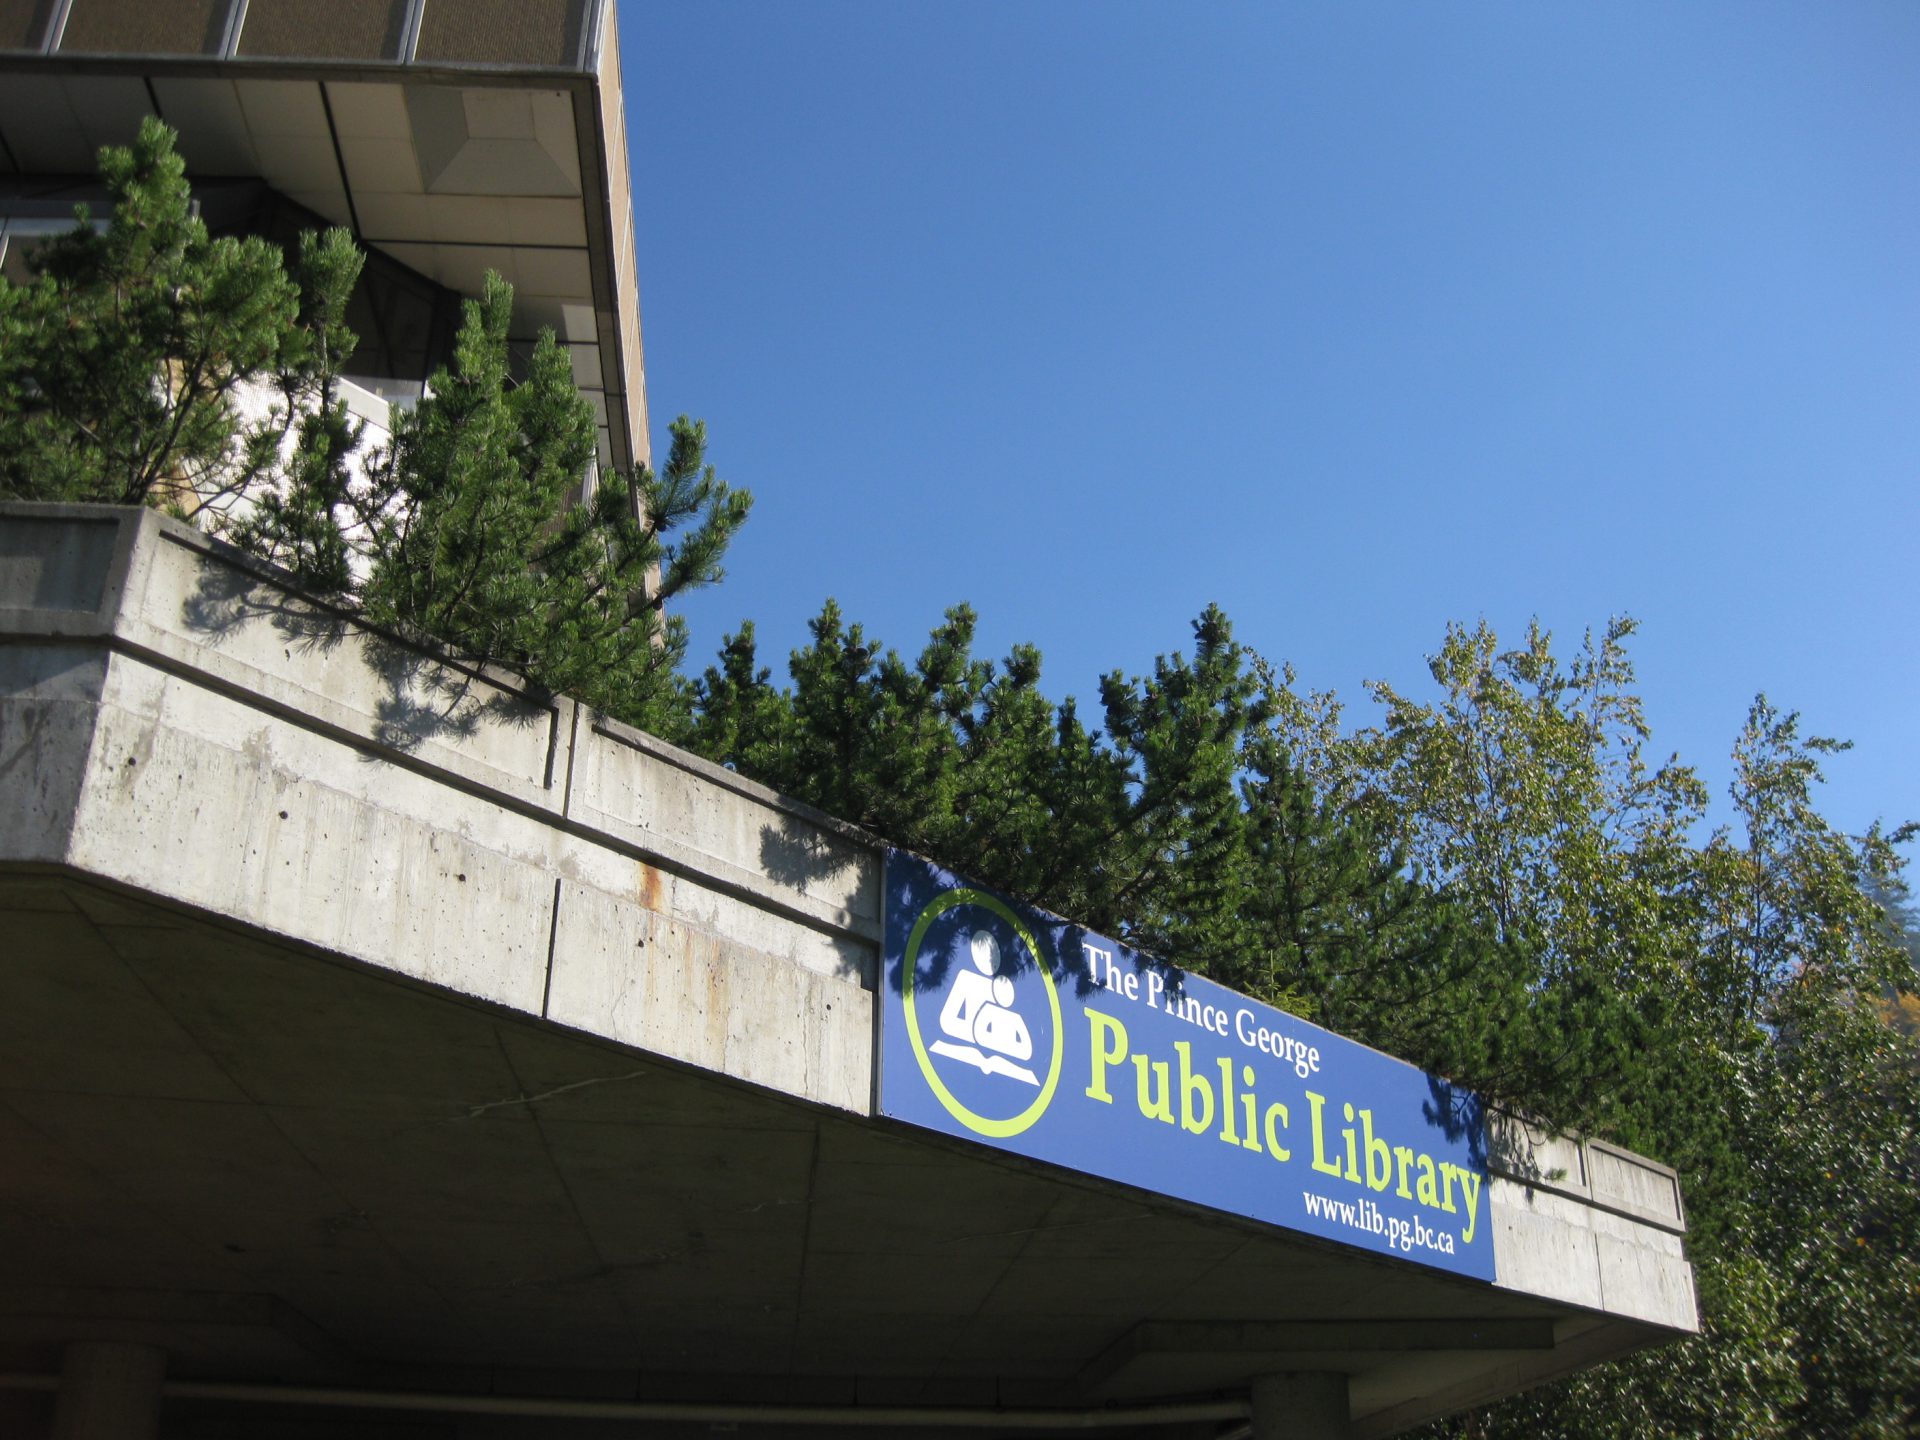 Public Library running downtown walking tours